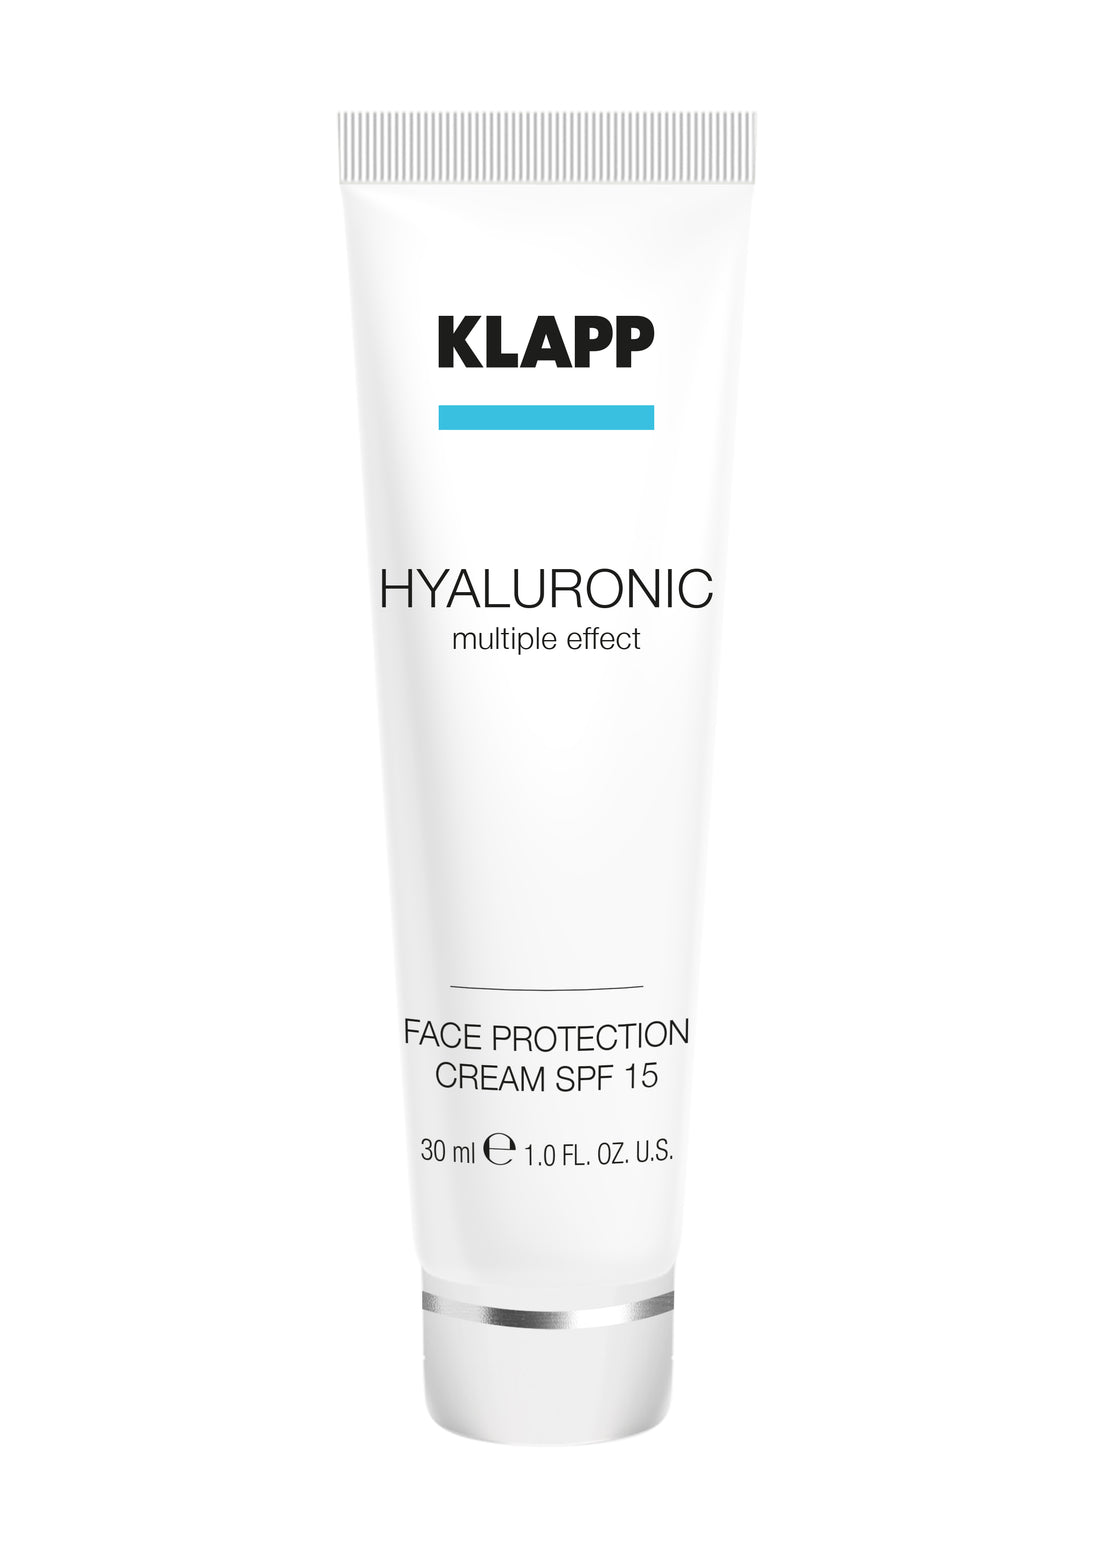 KLAPP hyaluronic -  Face protection Cream spf 15